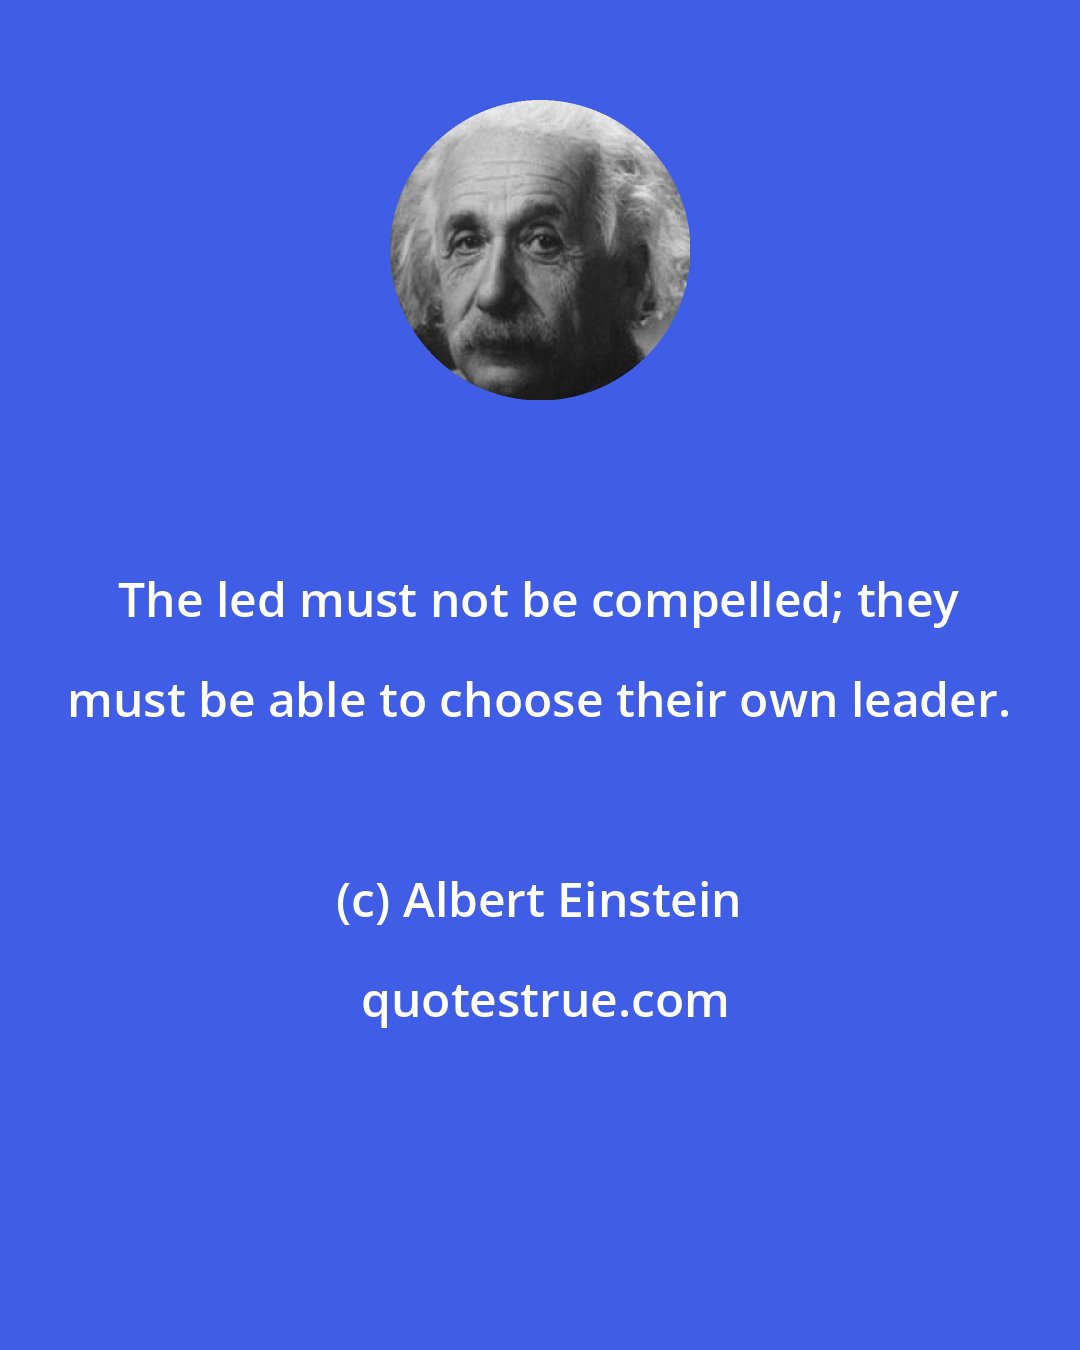 Albert Einstein: The led must not be compelled; they must be able to choose their own leader.